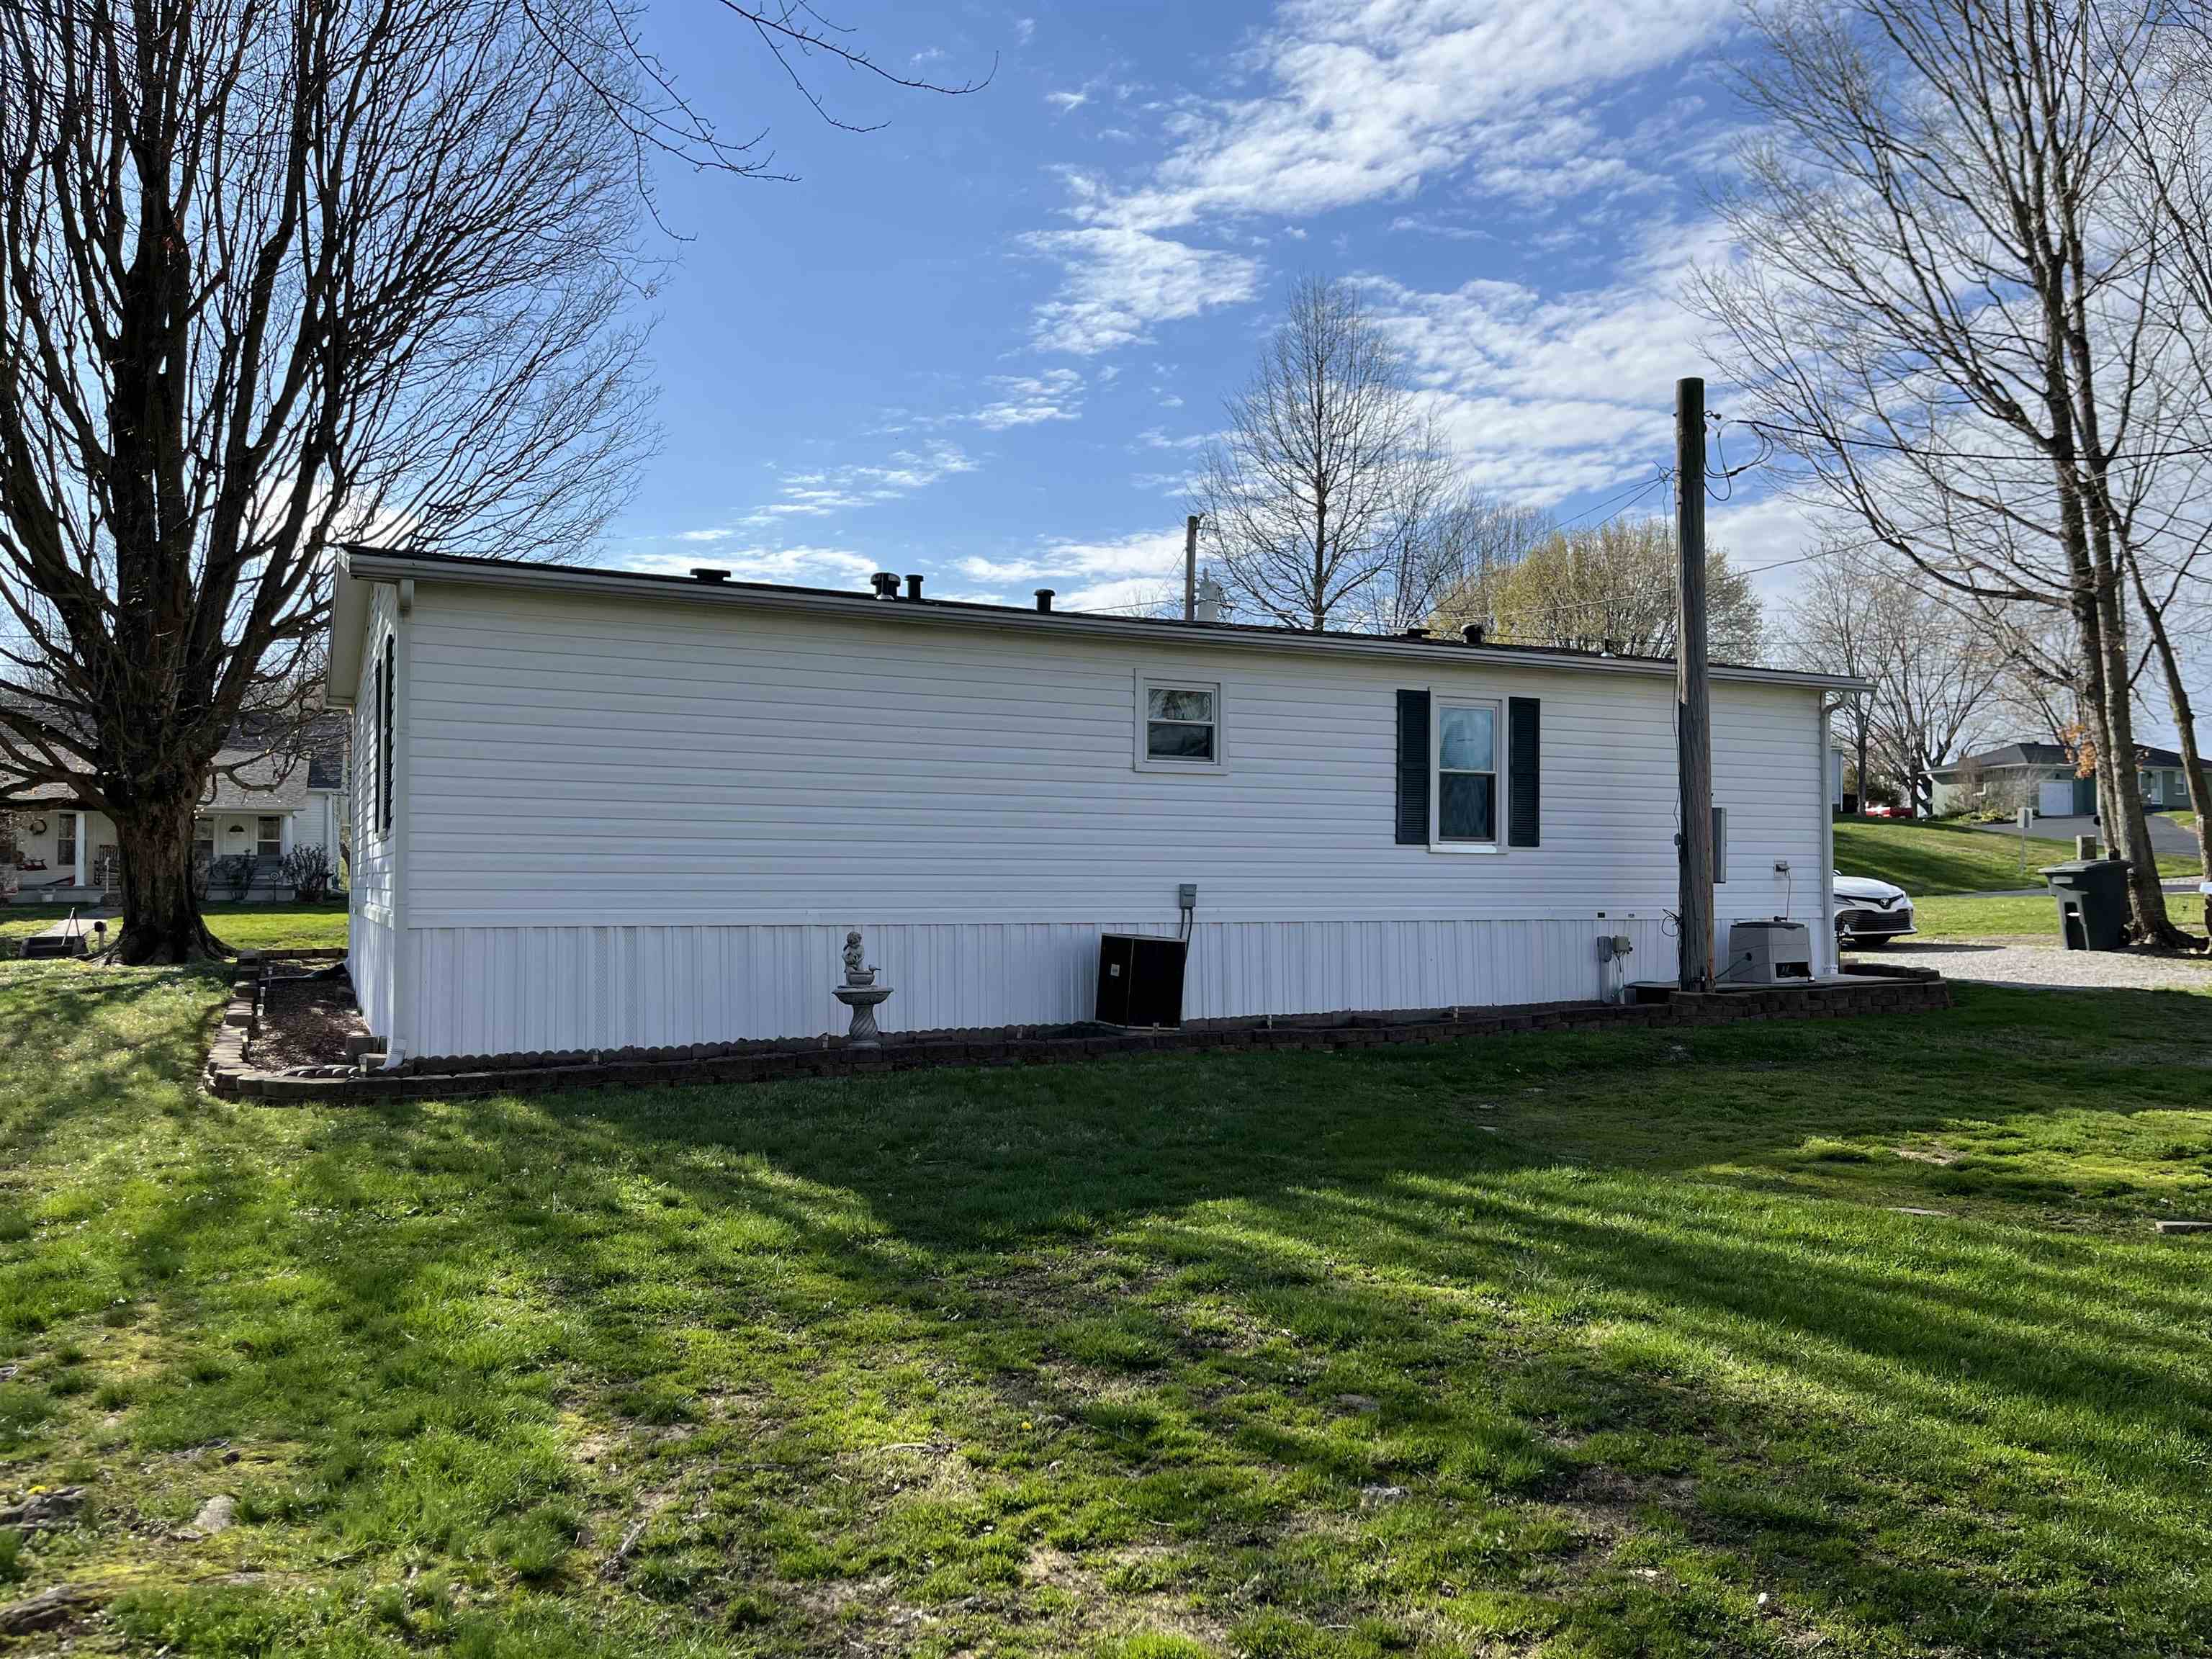 10418 Main Cross St., Whitesville, Kentucky 42378, 3 Bedrooms Bedrooms, ,2 BathroomsBathrooms,Manufactured Home,For Sale,Main Cross St.,89243